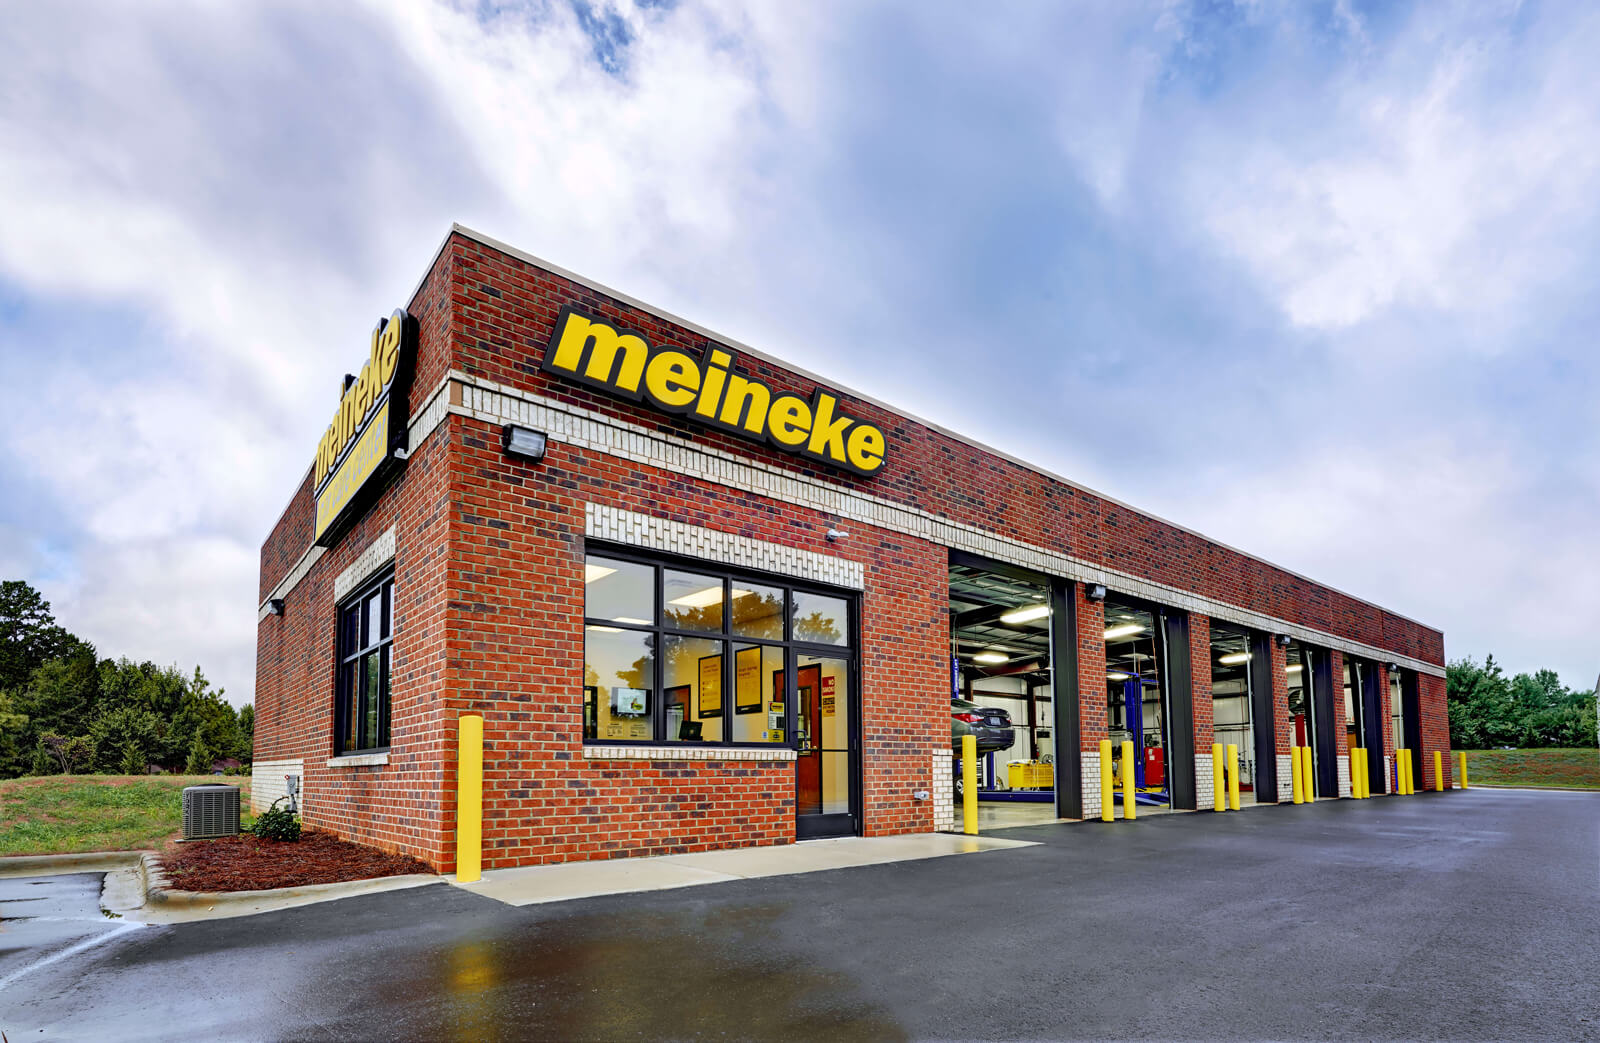 meineke-franchise-costs-and-franchise-info-for-2022-franchise-clique